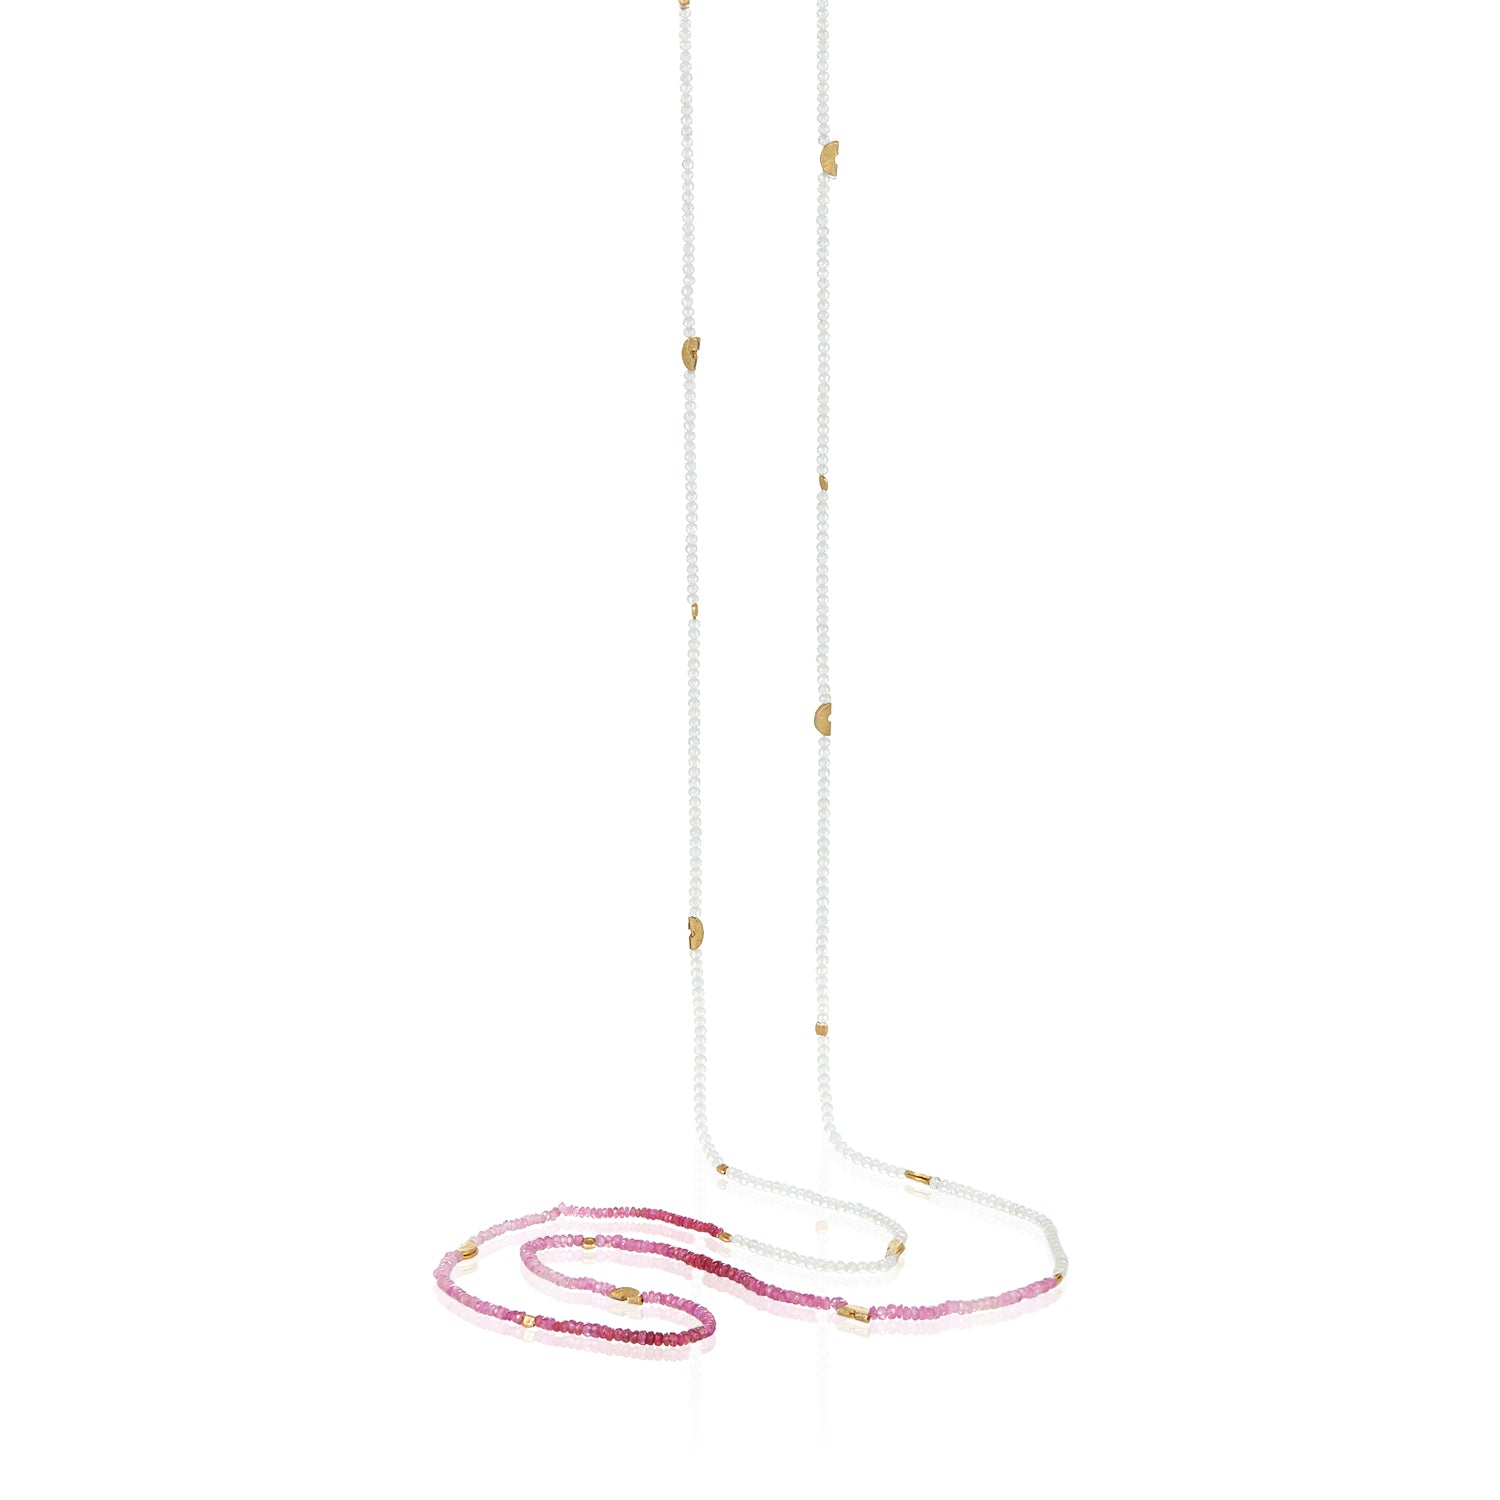 Half Moon Long Strand Necklace - Ruby